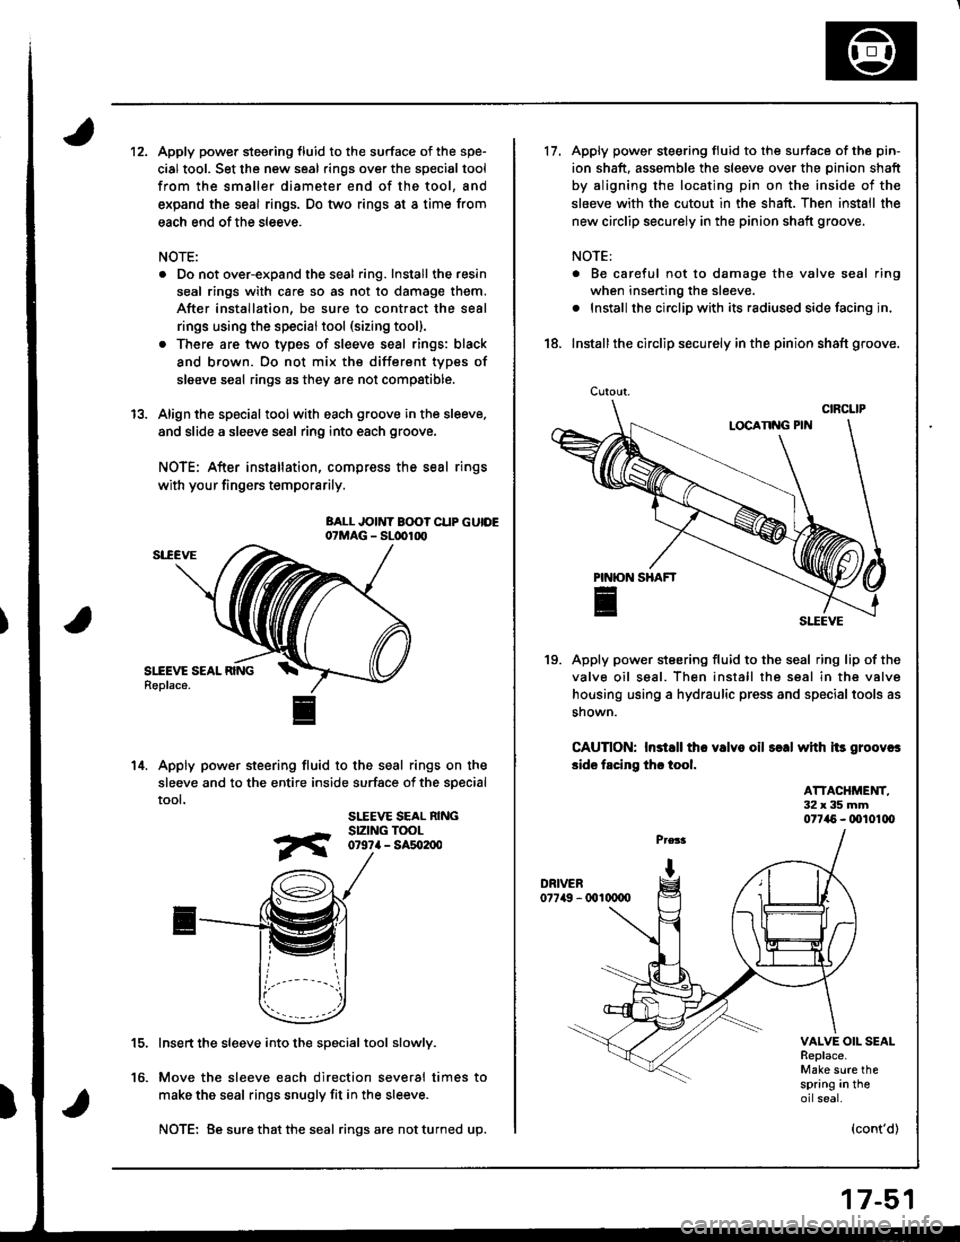 HONDA INTEGRA 1998 4.G Owners Manual 12.Apply power steering fluid to the surface of the spe-
cial tool. Set the new seal rings over the special tool
from the smaller diameter end of the tool, and
expand the seal rings. Do two rings at a